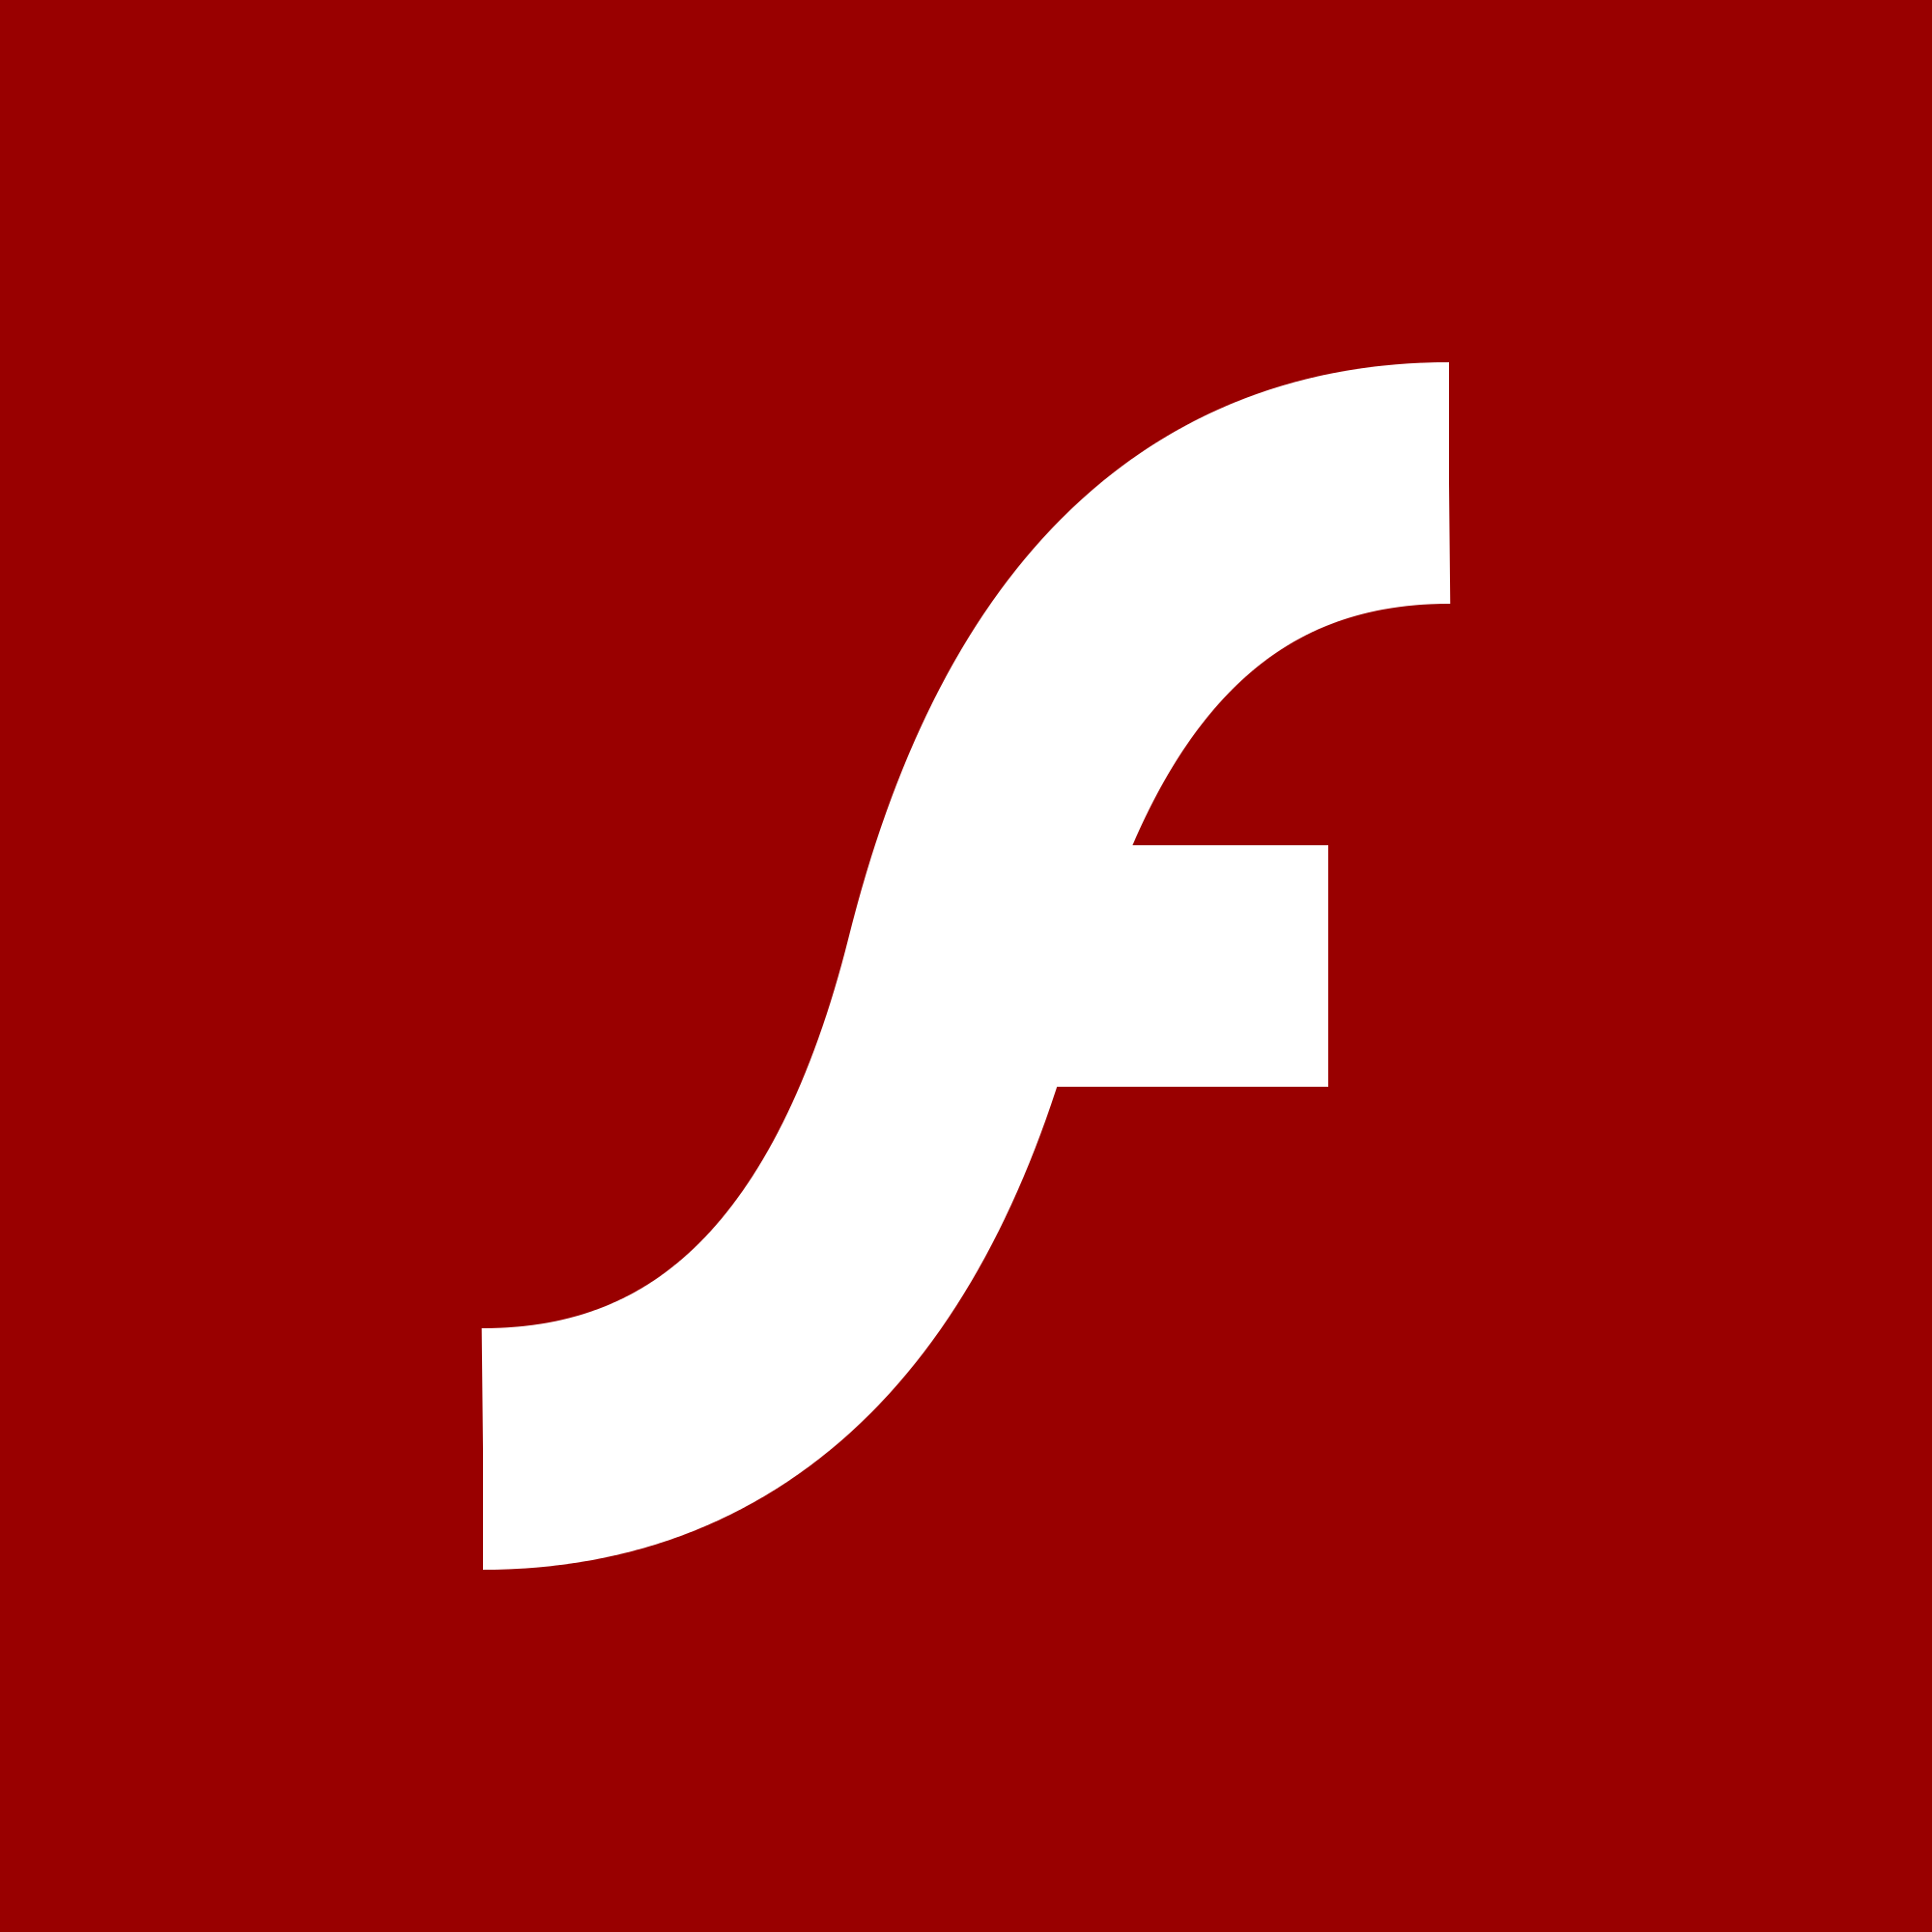 Square in a Red F Logo - File:Florin on red square.svg - Wikimedia Commons